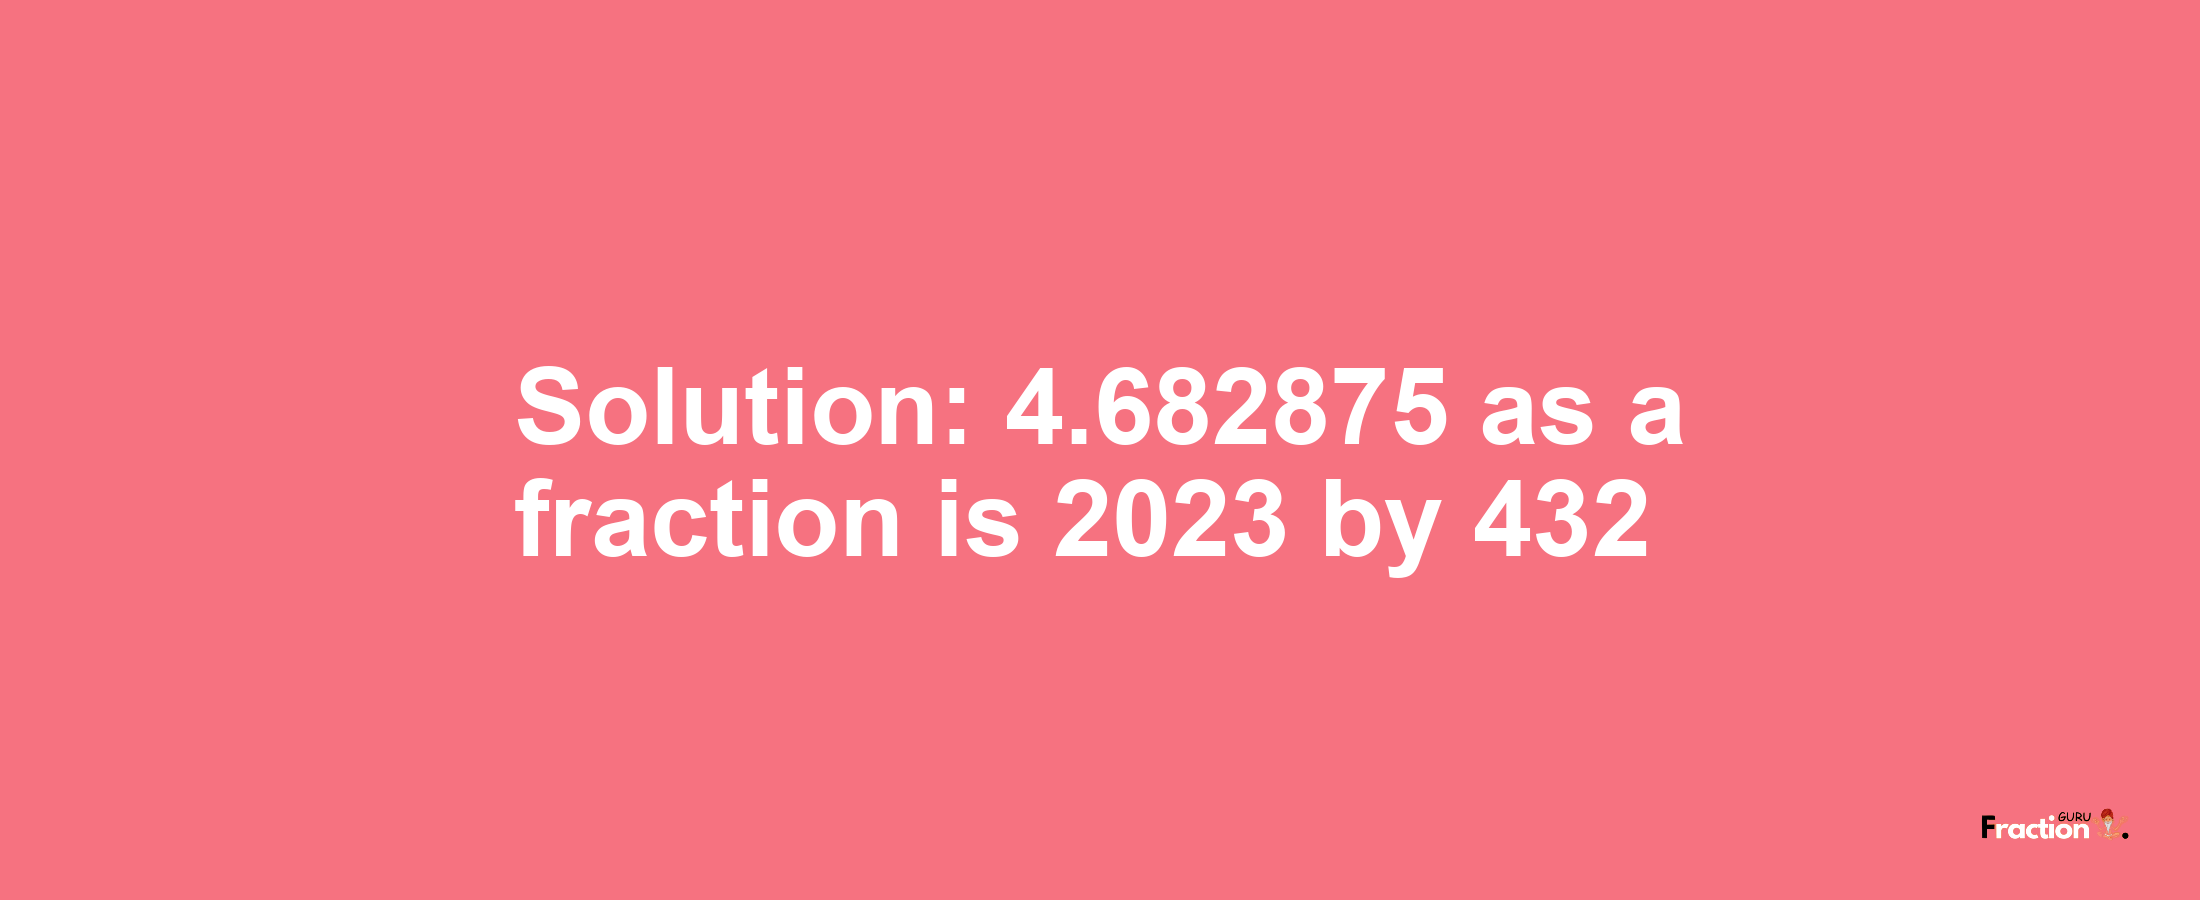 Solution:4.682875 as a fraction is 2023/432